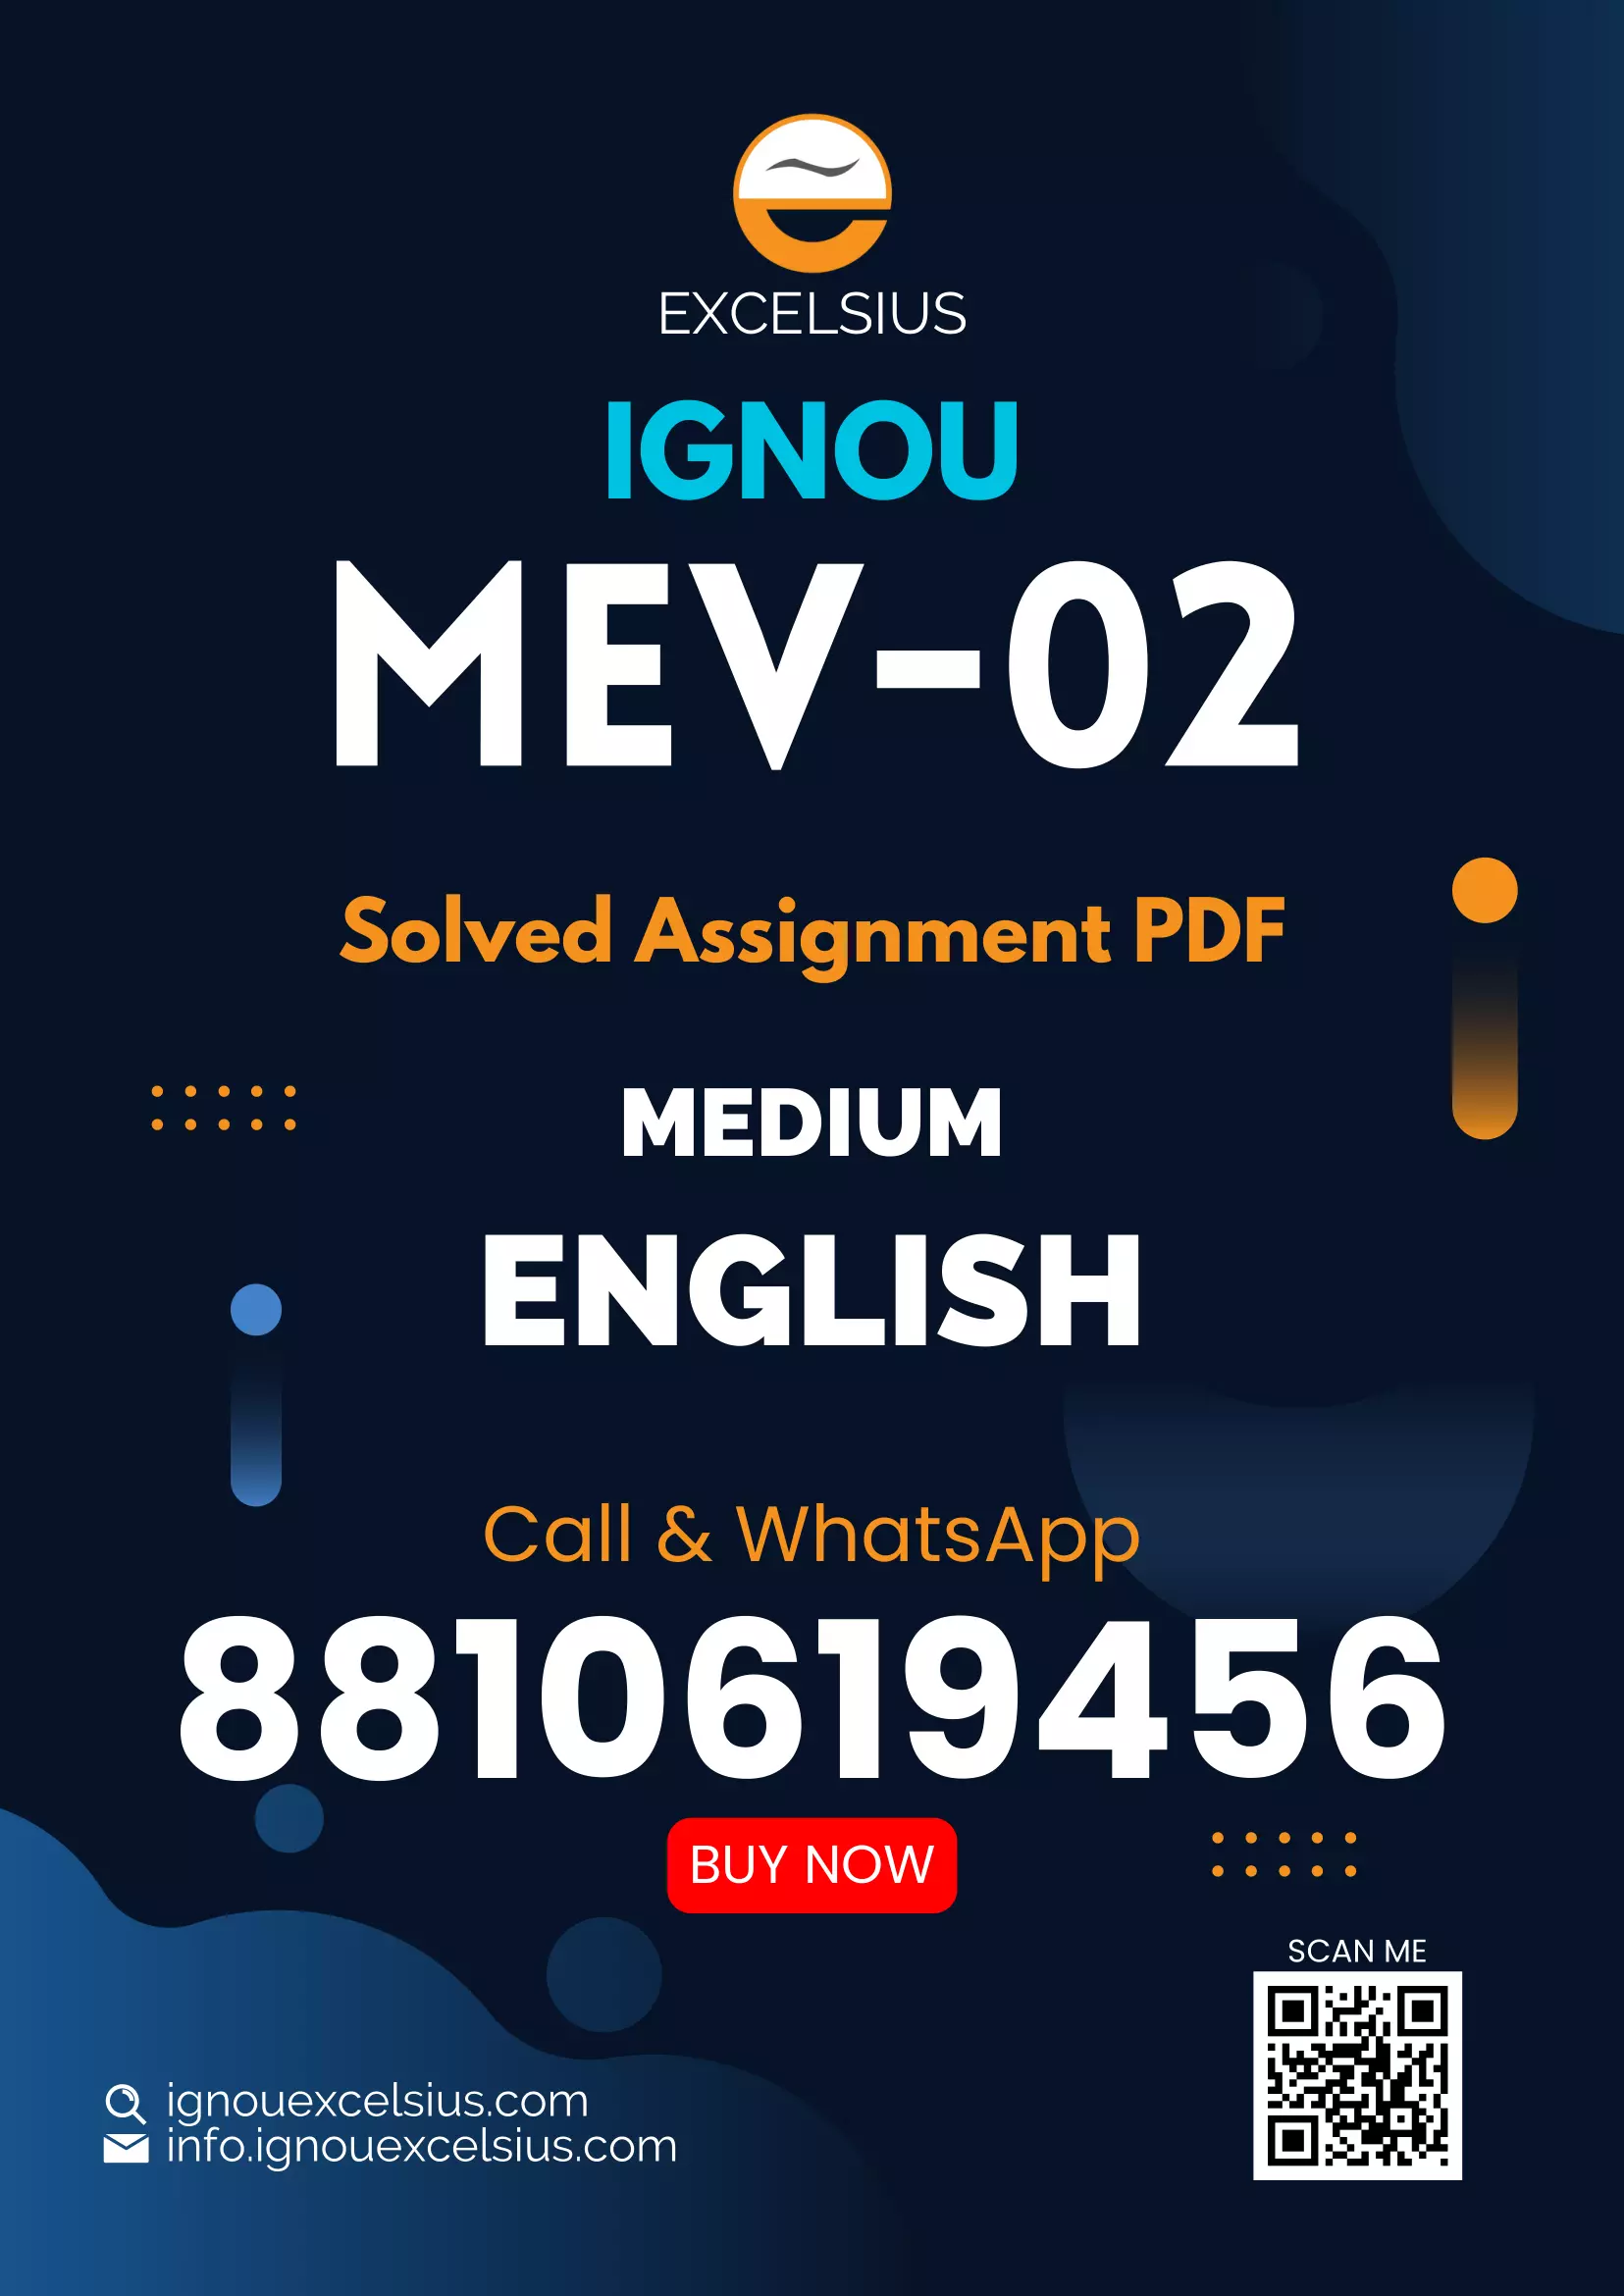 IGNOU MEV-02 - Environmental and Occupational Hazards Latest Solved Assignment -July 2022 – January 2023